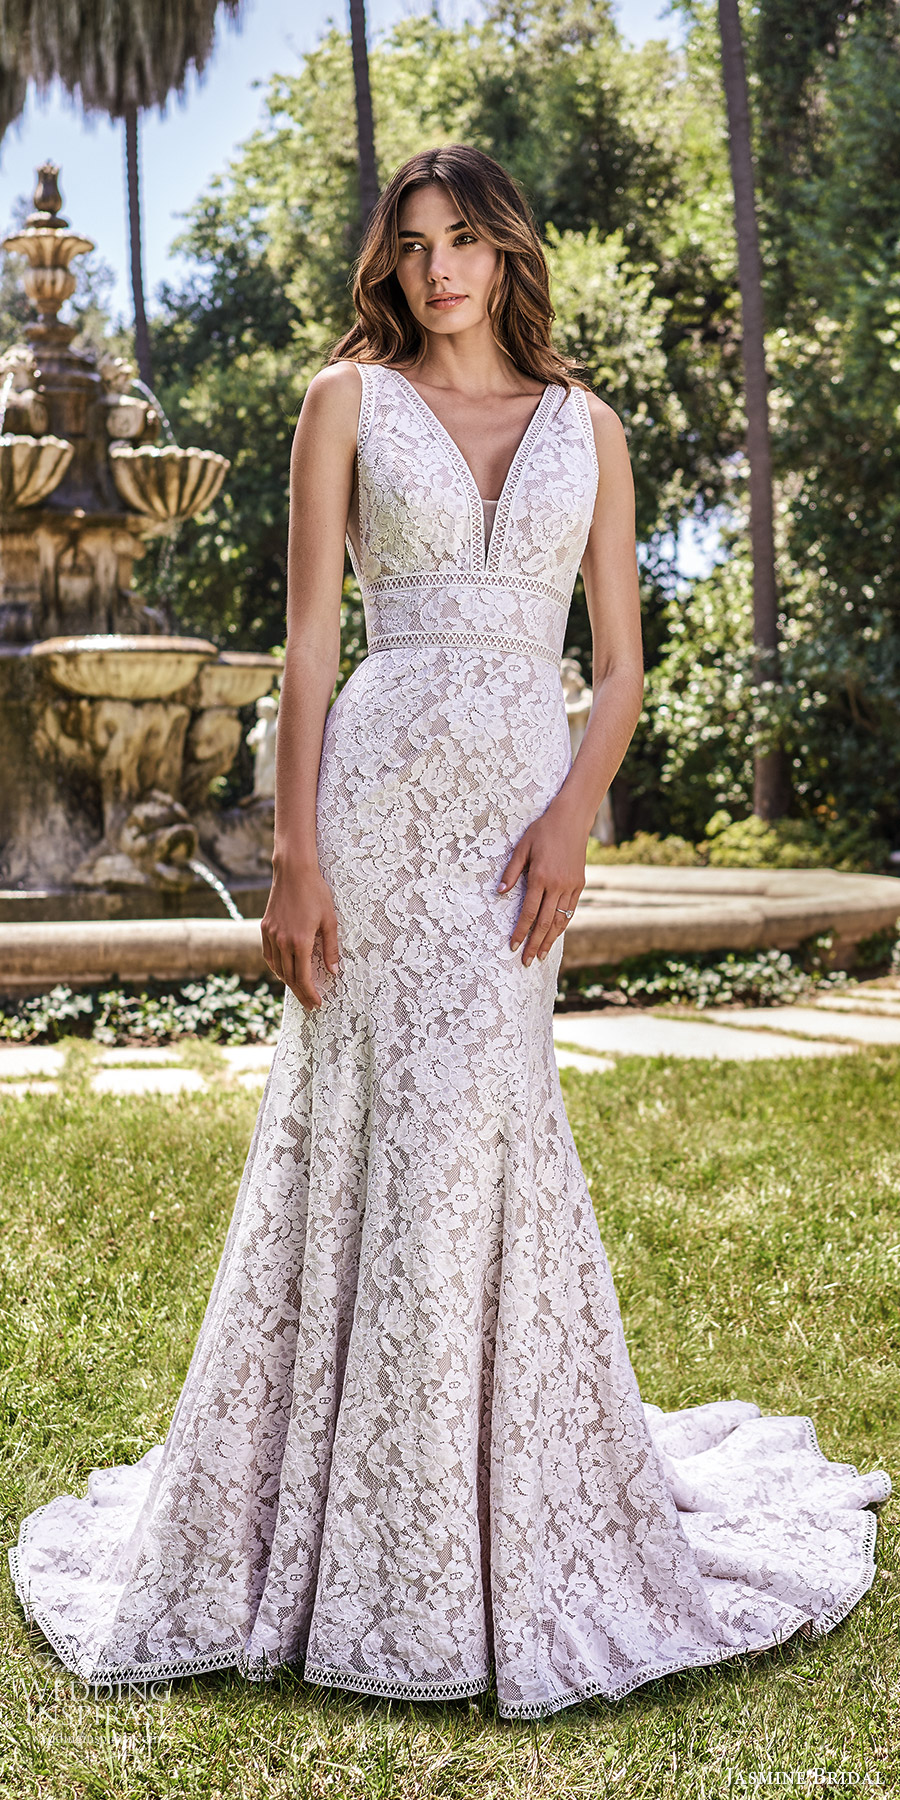 jasmine spring 2020 collection sleeveless thick straps plunging v neckline fully embellished lace fit flare mermaid wedding dress chapel train (3) mv